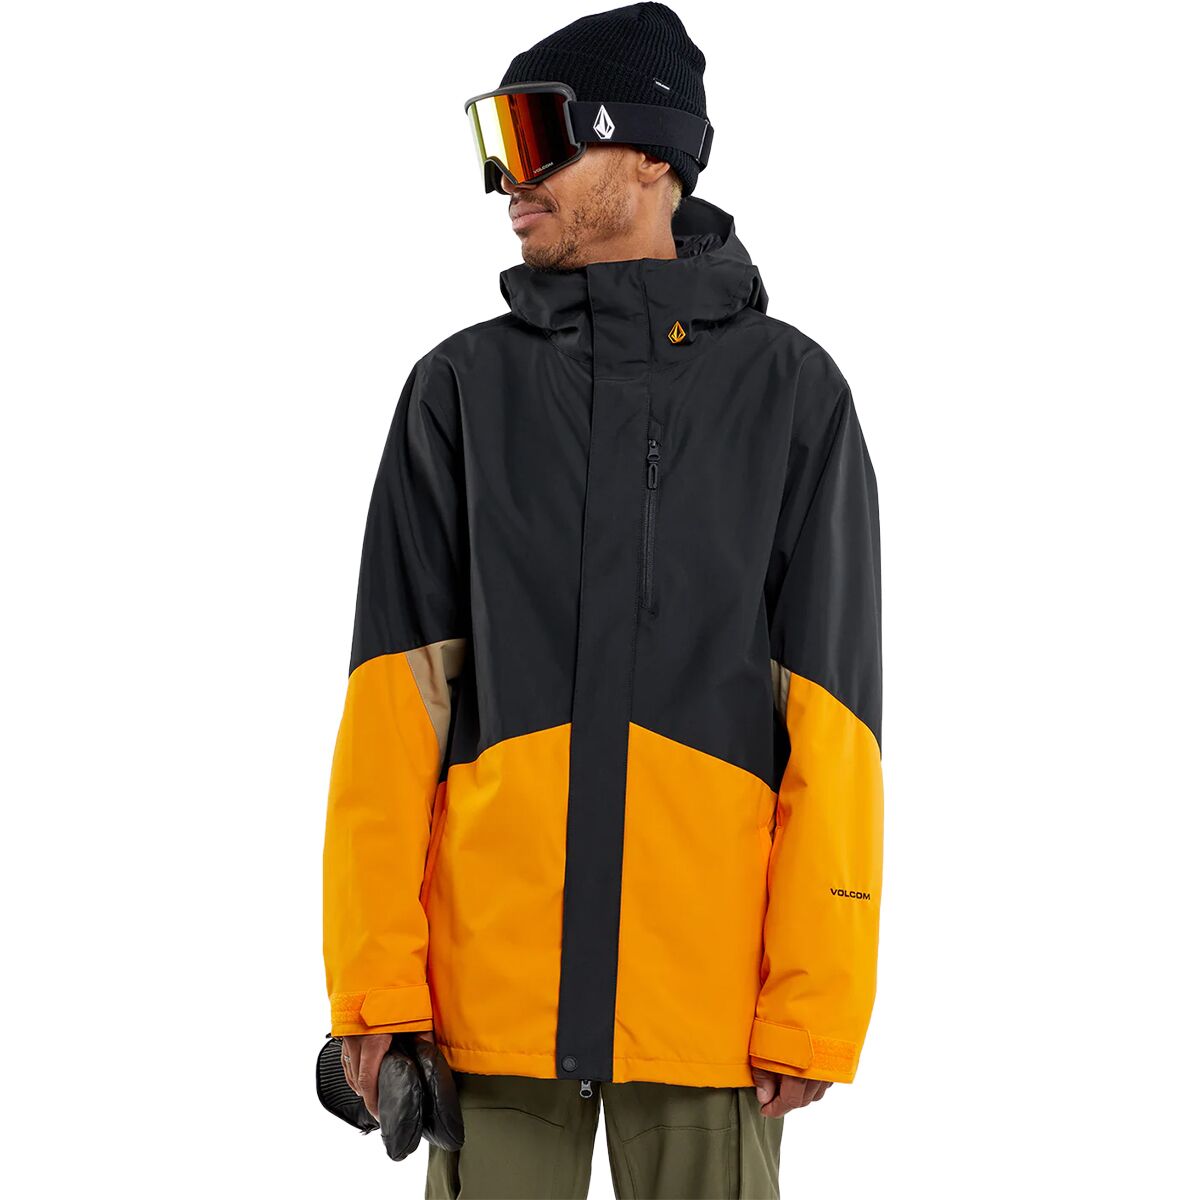 VCOLP Insulated Jacket - Men